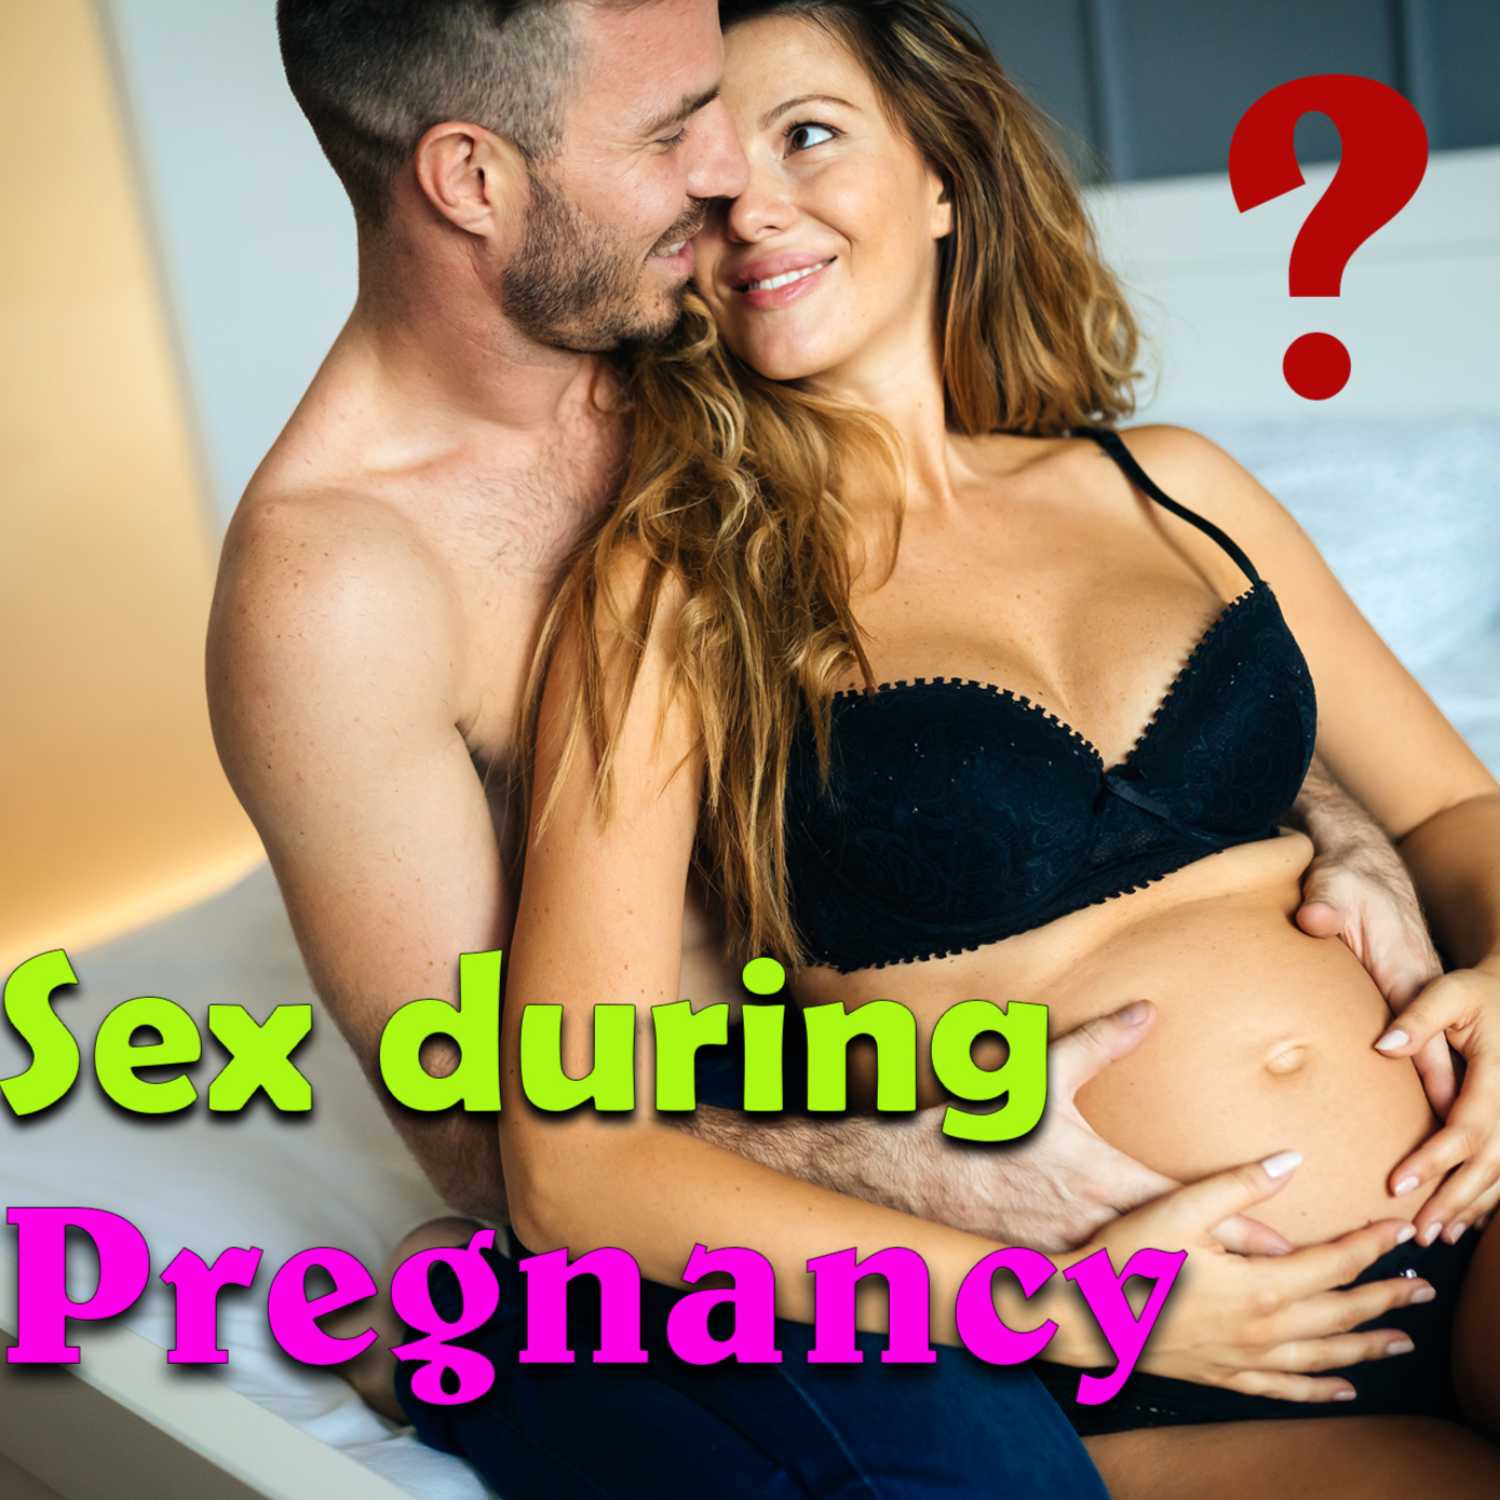 Sex drive during pregnancy